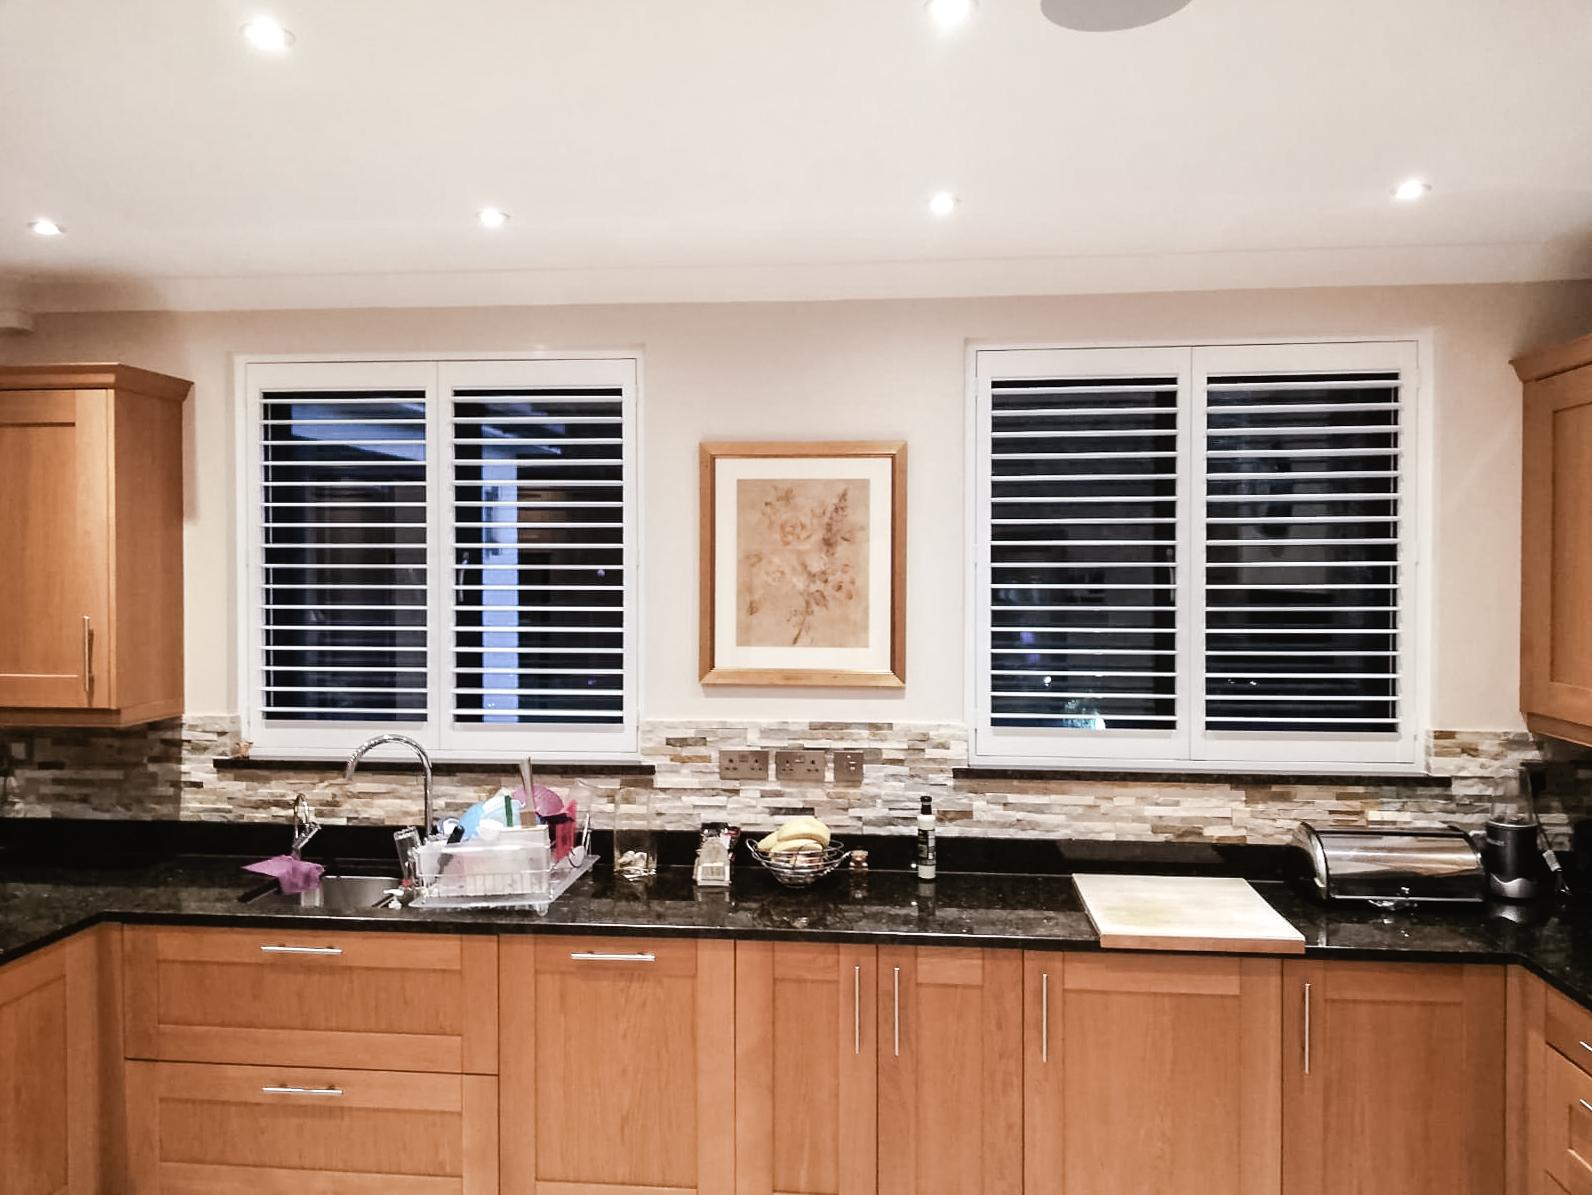 New Age Shutters West Malling 020 7112 8342